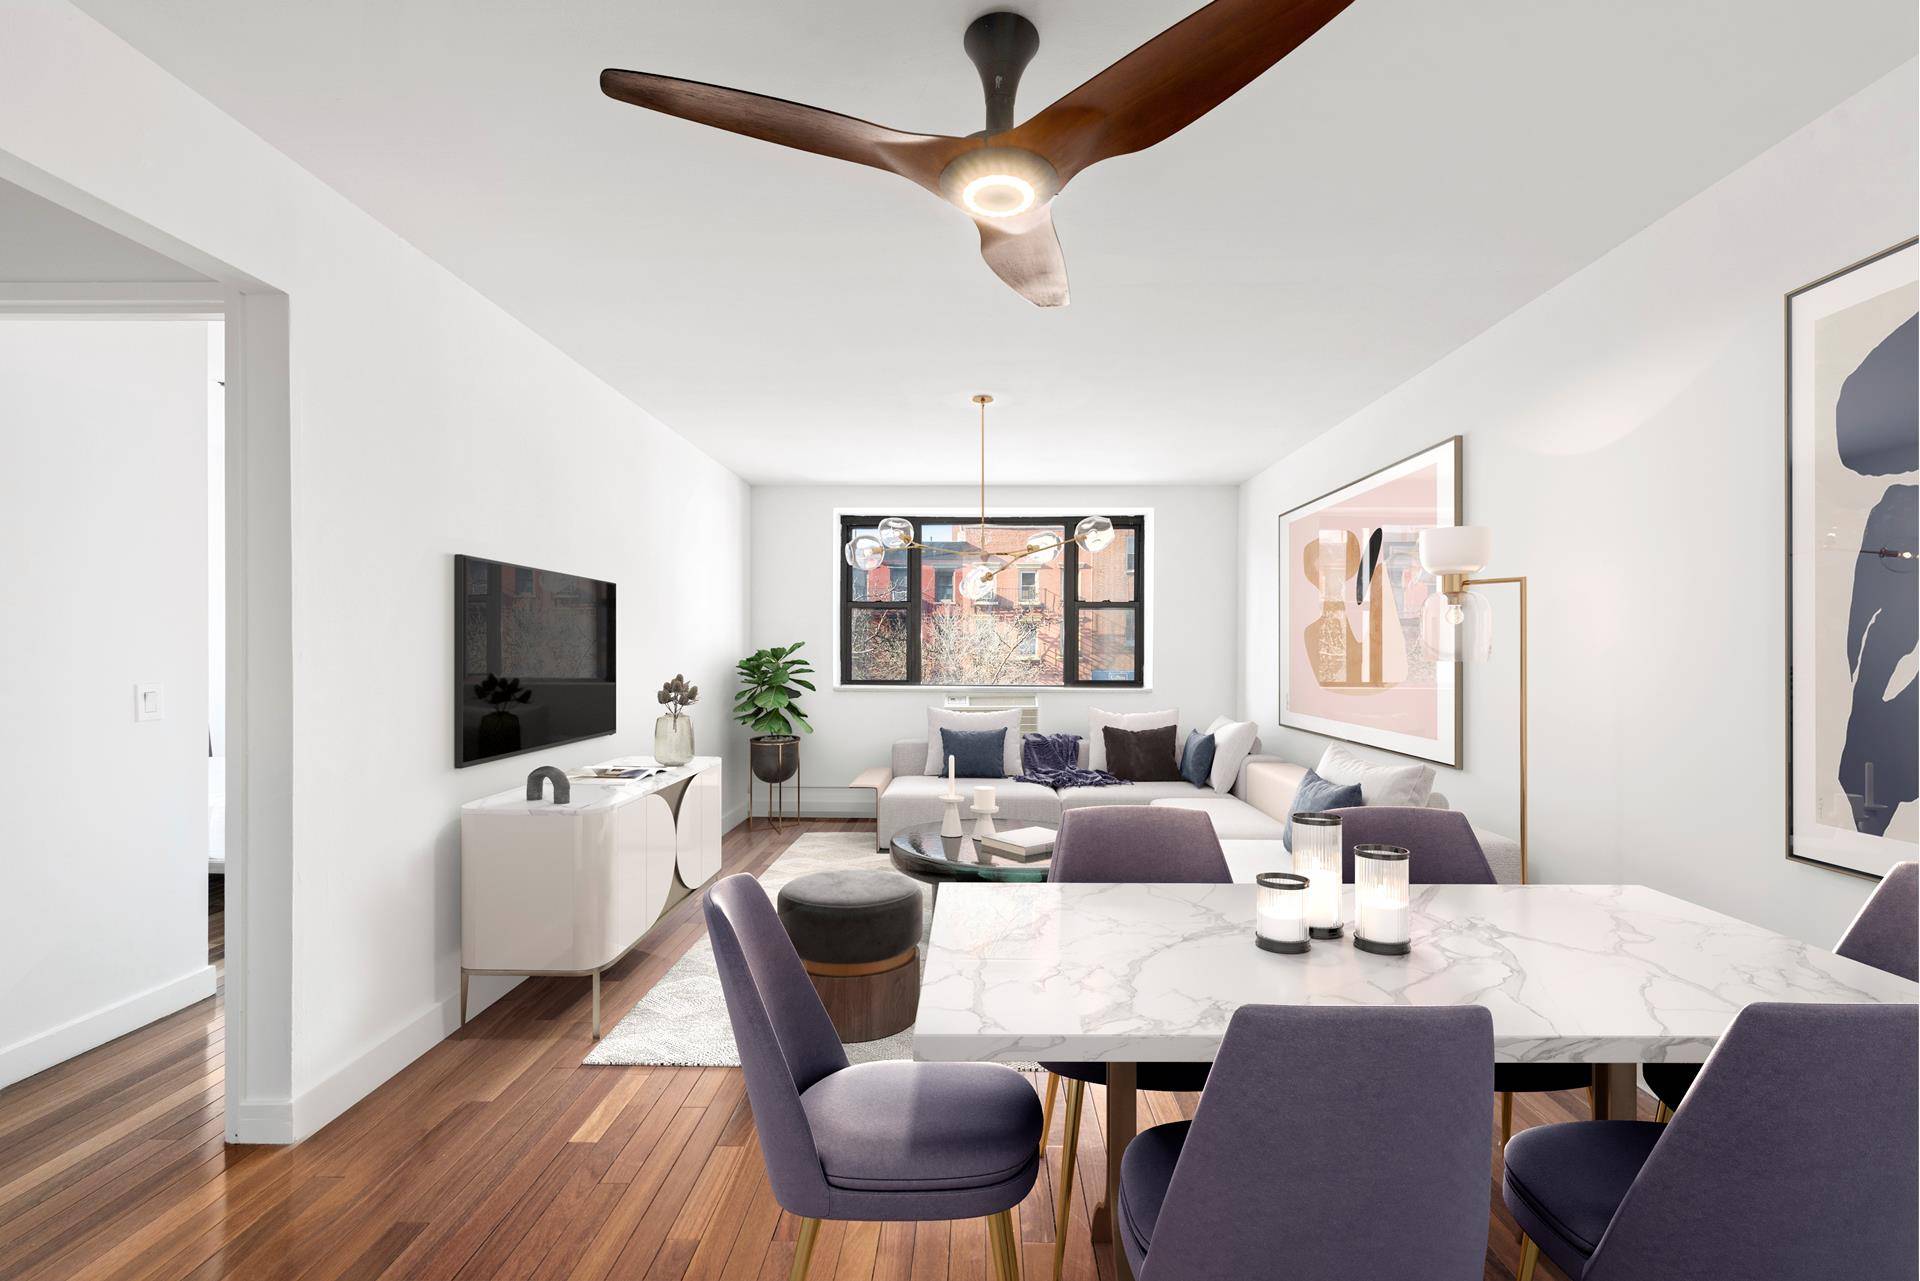 This perfectly situated condo is a newly renovated, spacious and sun flooded one bedroom home at the nexus of the East Village, Gramercy and Union Square !